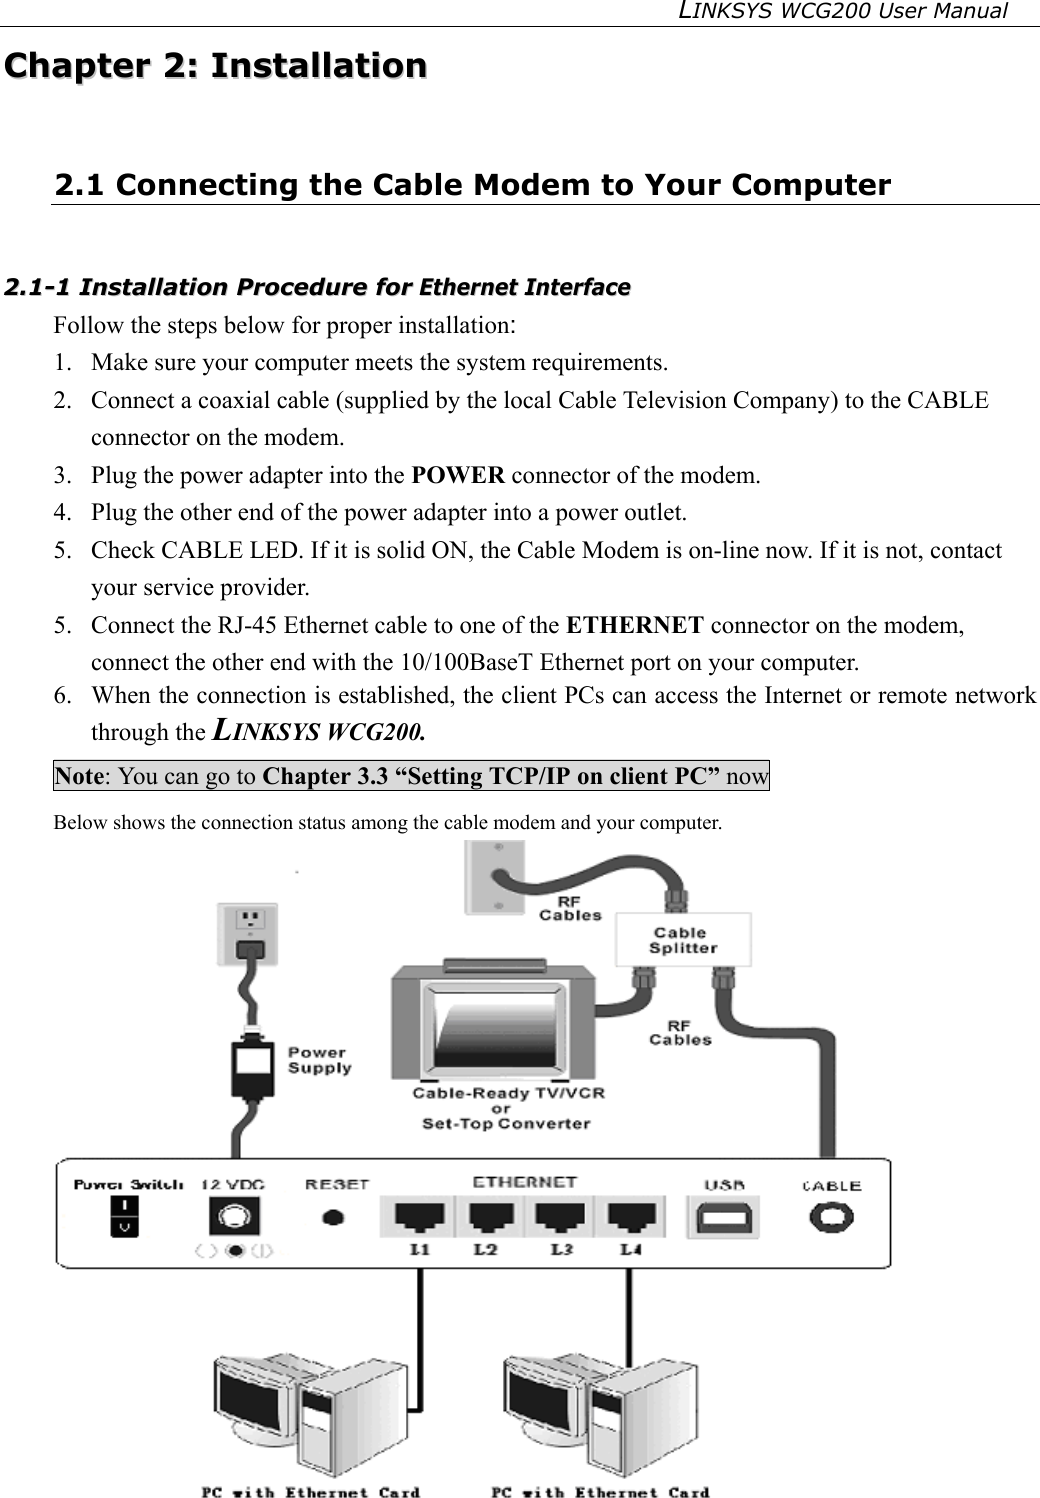 LINKSYS WCG200 User Manual   CChhaapptteerr  22::  IInnssttaallllaattiioonn  2.1 Connecting the Cable Modem to Your Computer   22..11--11  IInnssttaallllaattiioonn  PPrroocceedduurree  ffoorr  EEtthheerrnneett  IInntteerrffaaccee  Follow the steps below for proper installation: 1.  Make sure your computer meets the system requirements. 2.  Connect a coaxial cable (supplied by the local Cable Television Company) to the CABLE connector on the modem. 3.  Plug the power adapter into the POWER connector of the modem. 4.  Plug the other end of the power adapter into a power outlet. 5.  Check CABLE LED. If it is solid ON, the Cable Modem is on-line now. If it is not, contact your service provider. 5.  Connect the RJ-45 Ethernet cable to one of the ETHERNET connector on the modem, connect the other end with the 10/100BaseT Ethernet port on your computer. 6.  When the connection is established, the client PCs can access the Internet or remote network through the LINKSYS WCG200. Note: You can go to Chapter 3.3 “Setting TCP/IP on client PC” now Below shows the connection status among the cable modem and your computer.  